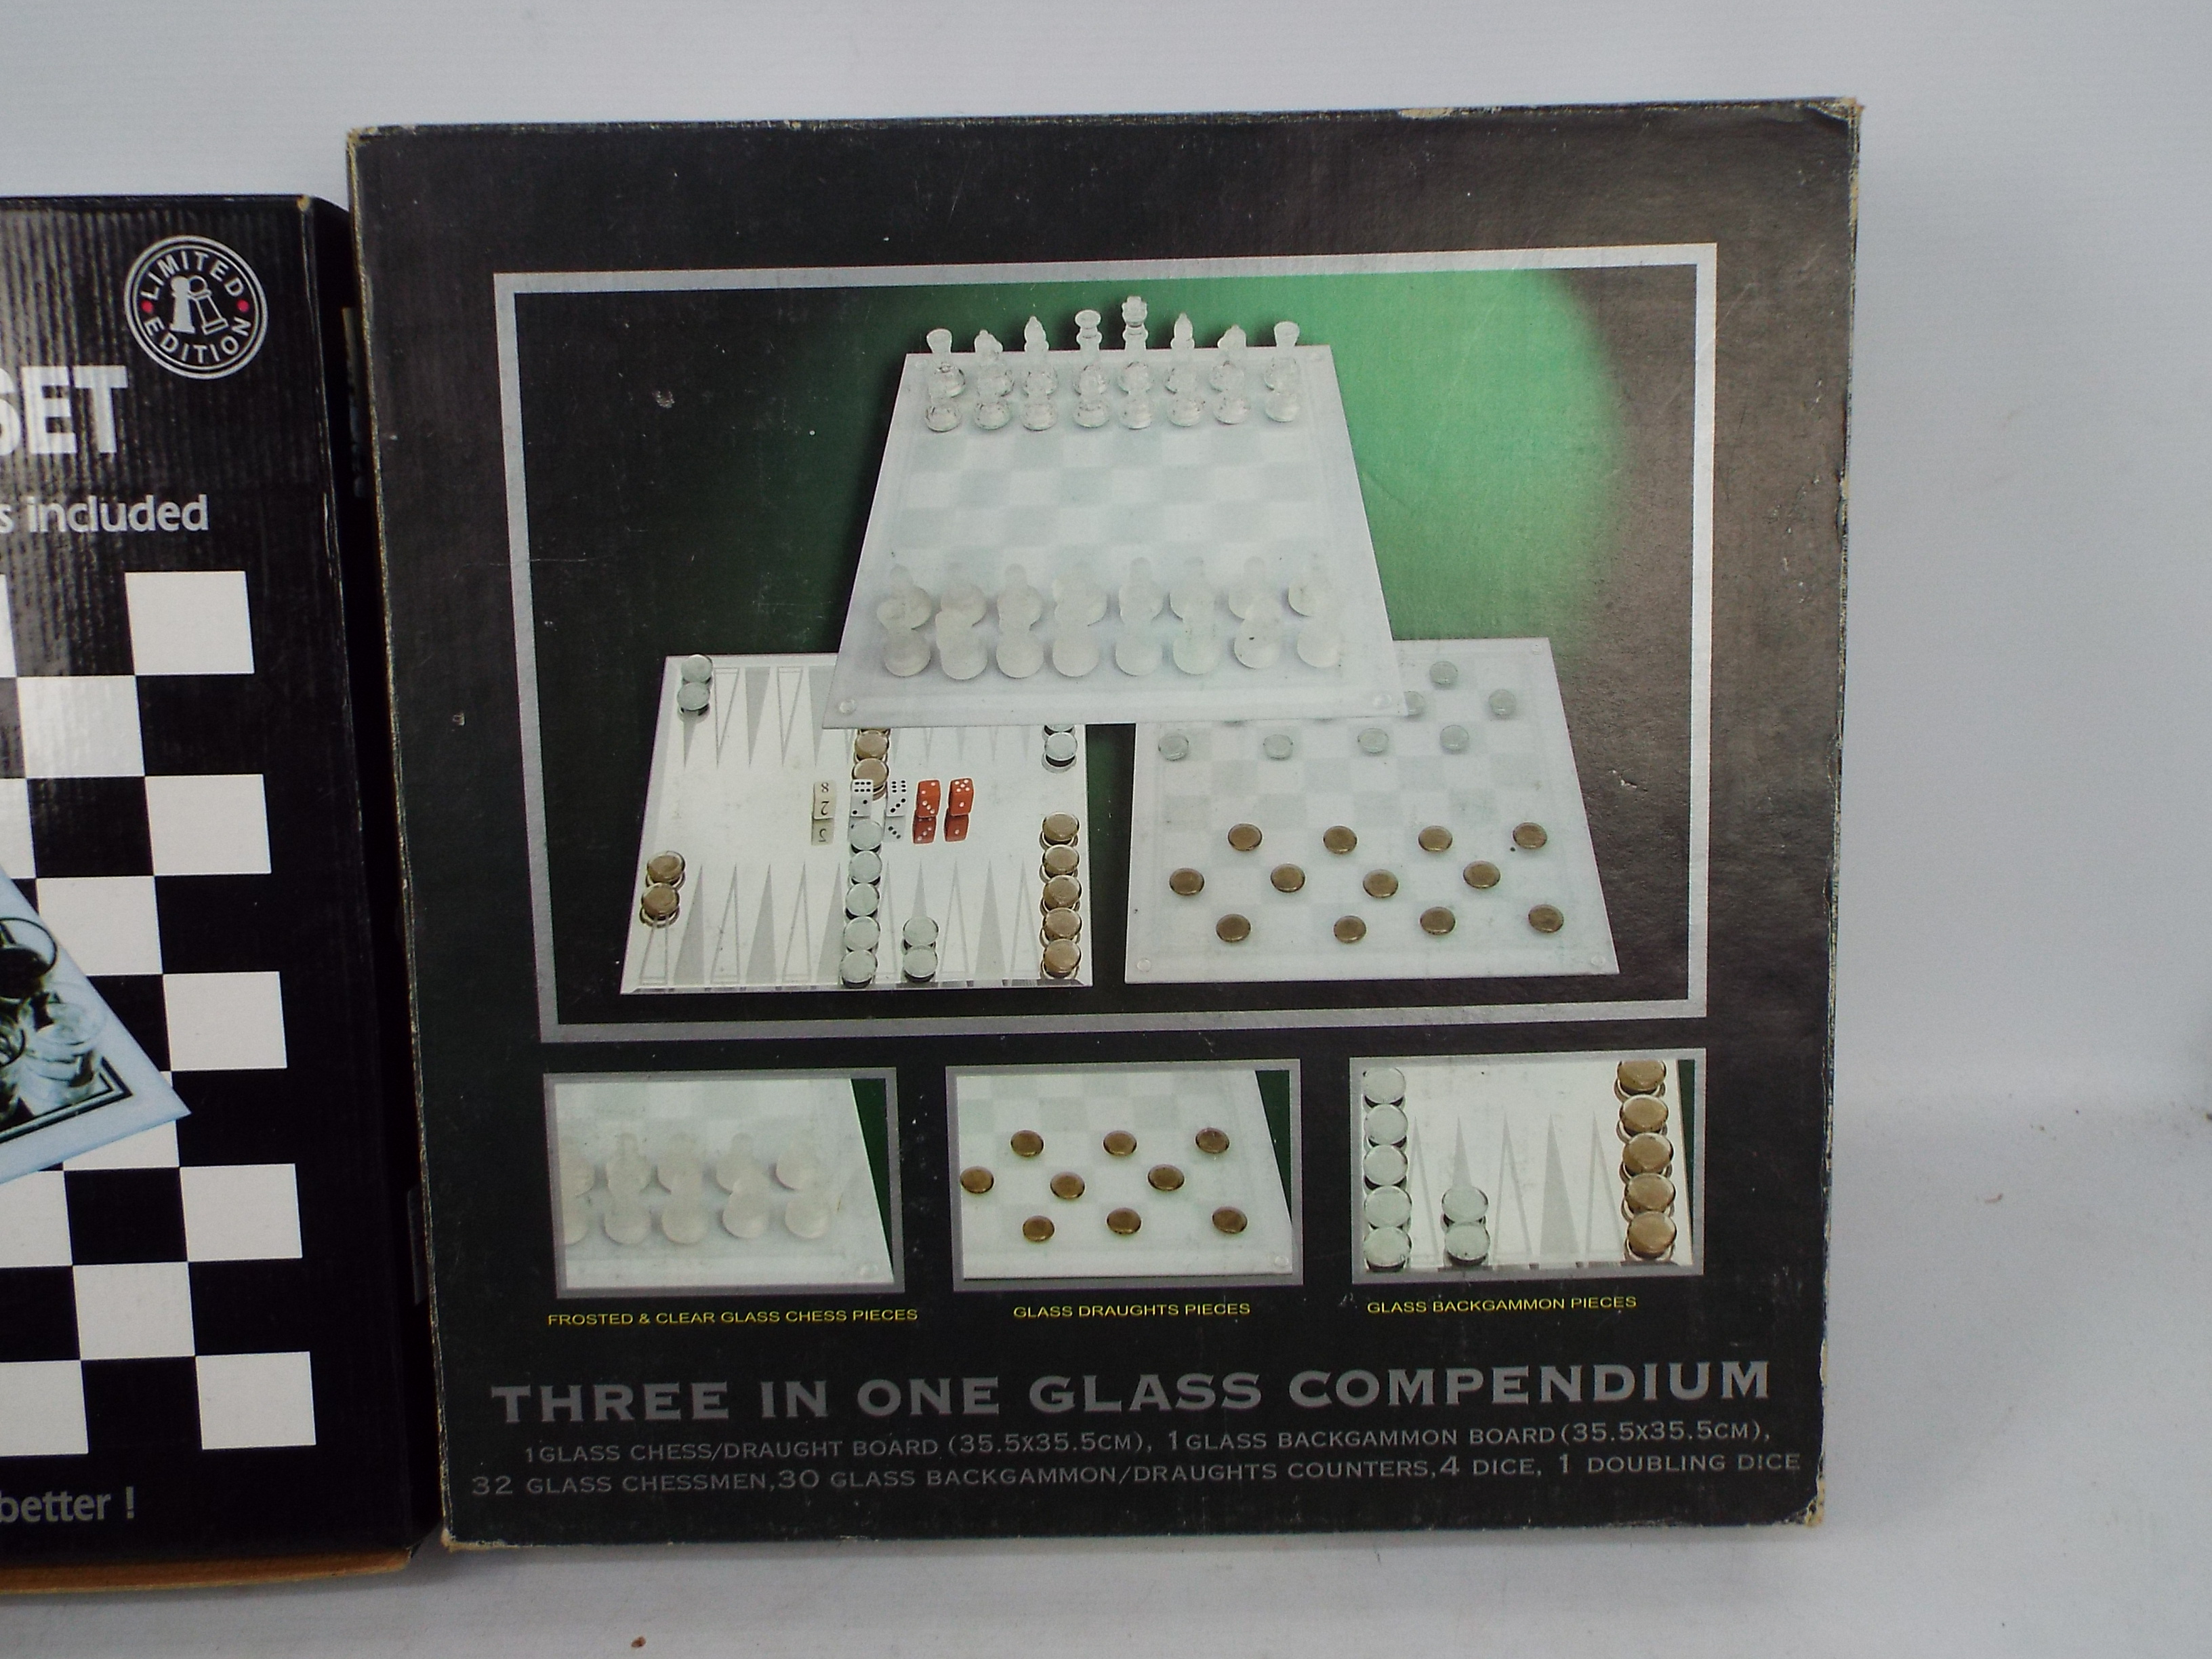 A 3 in 1 glass games compendium and a glass shot glass chess set, both boxed. - Image 3 of 3